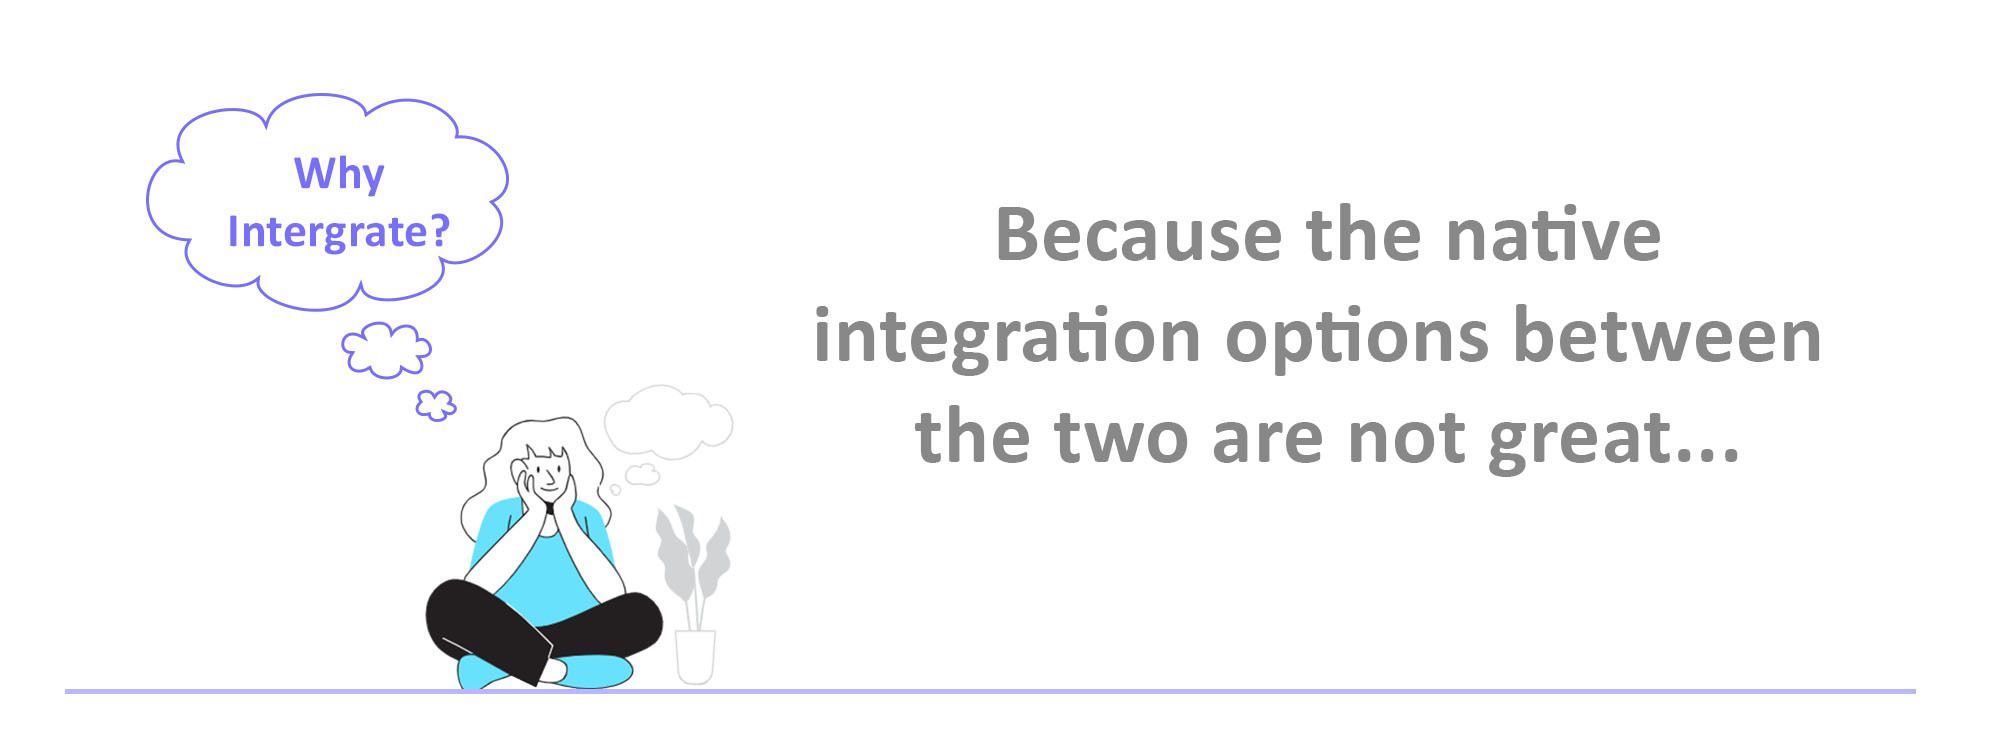 Native integration options for connecting HubSpot & Google Drive are not great